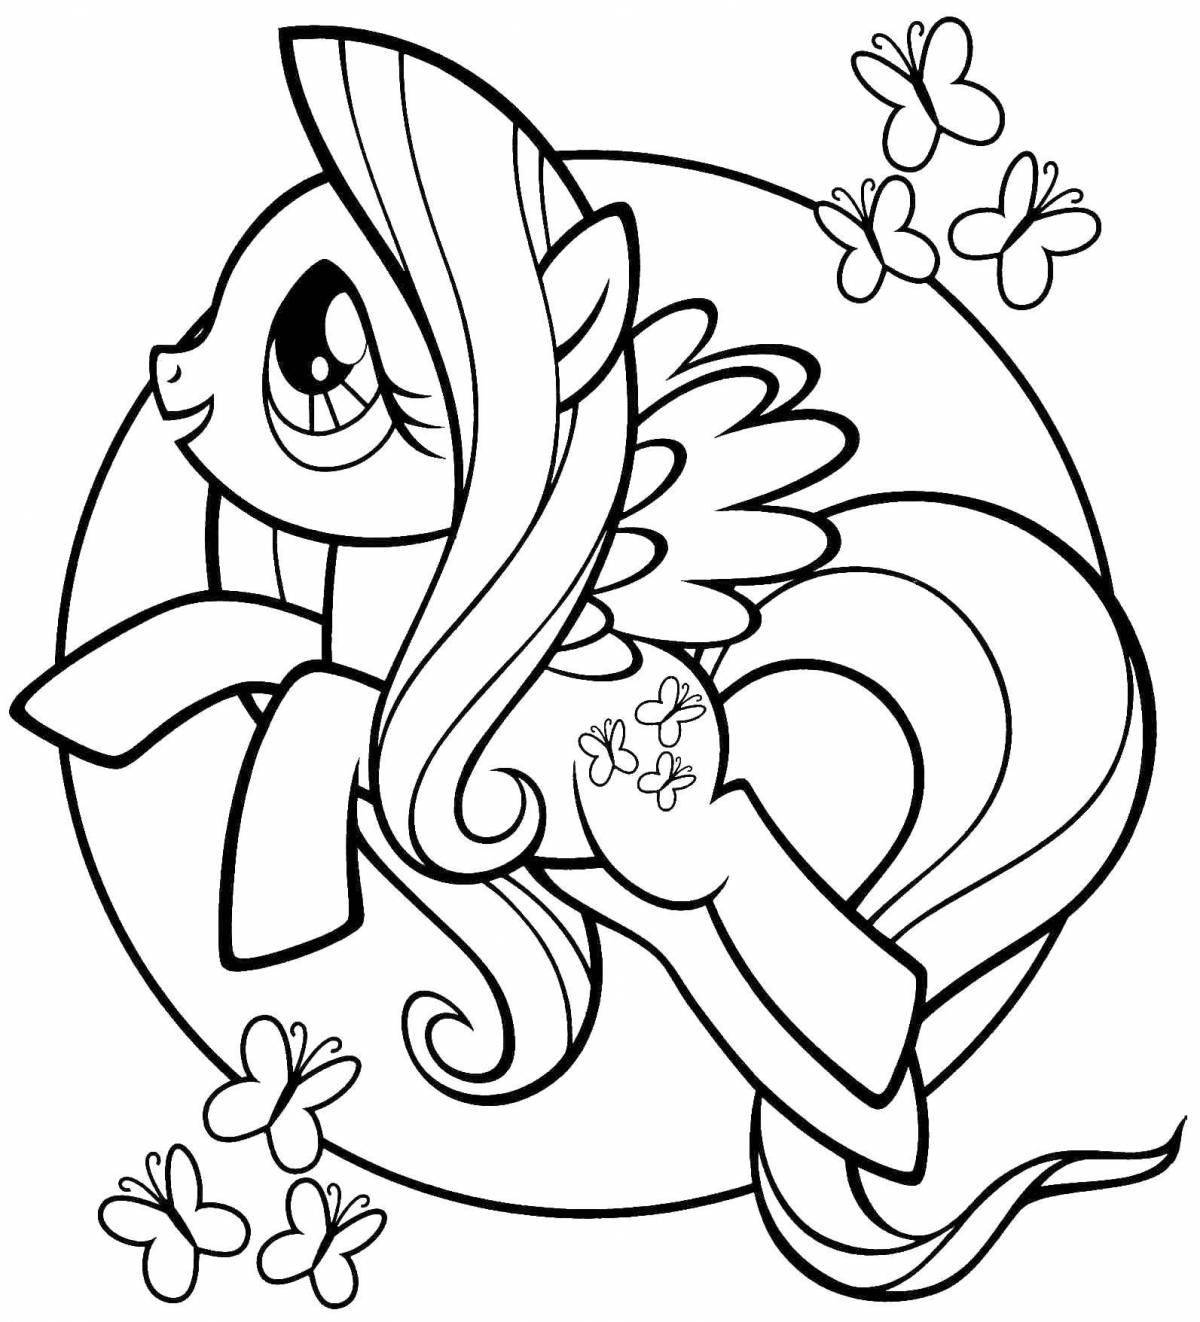 Fluttershy's happy coloring book